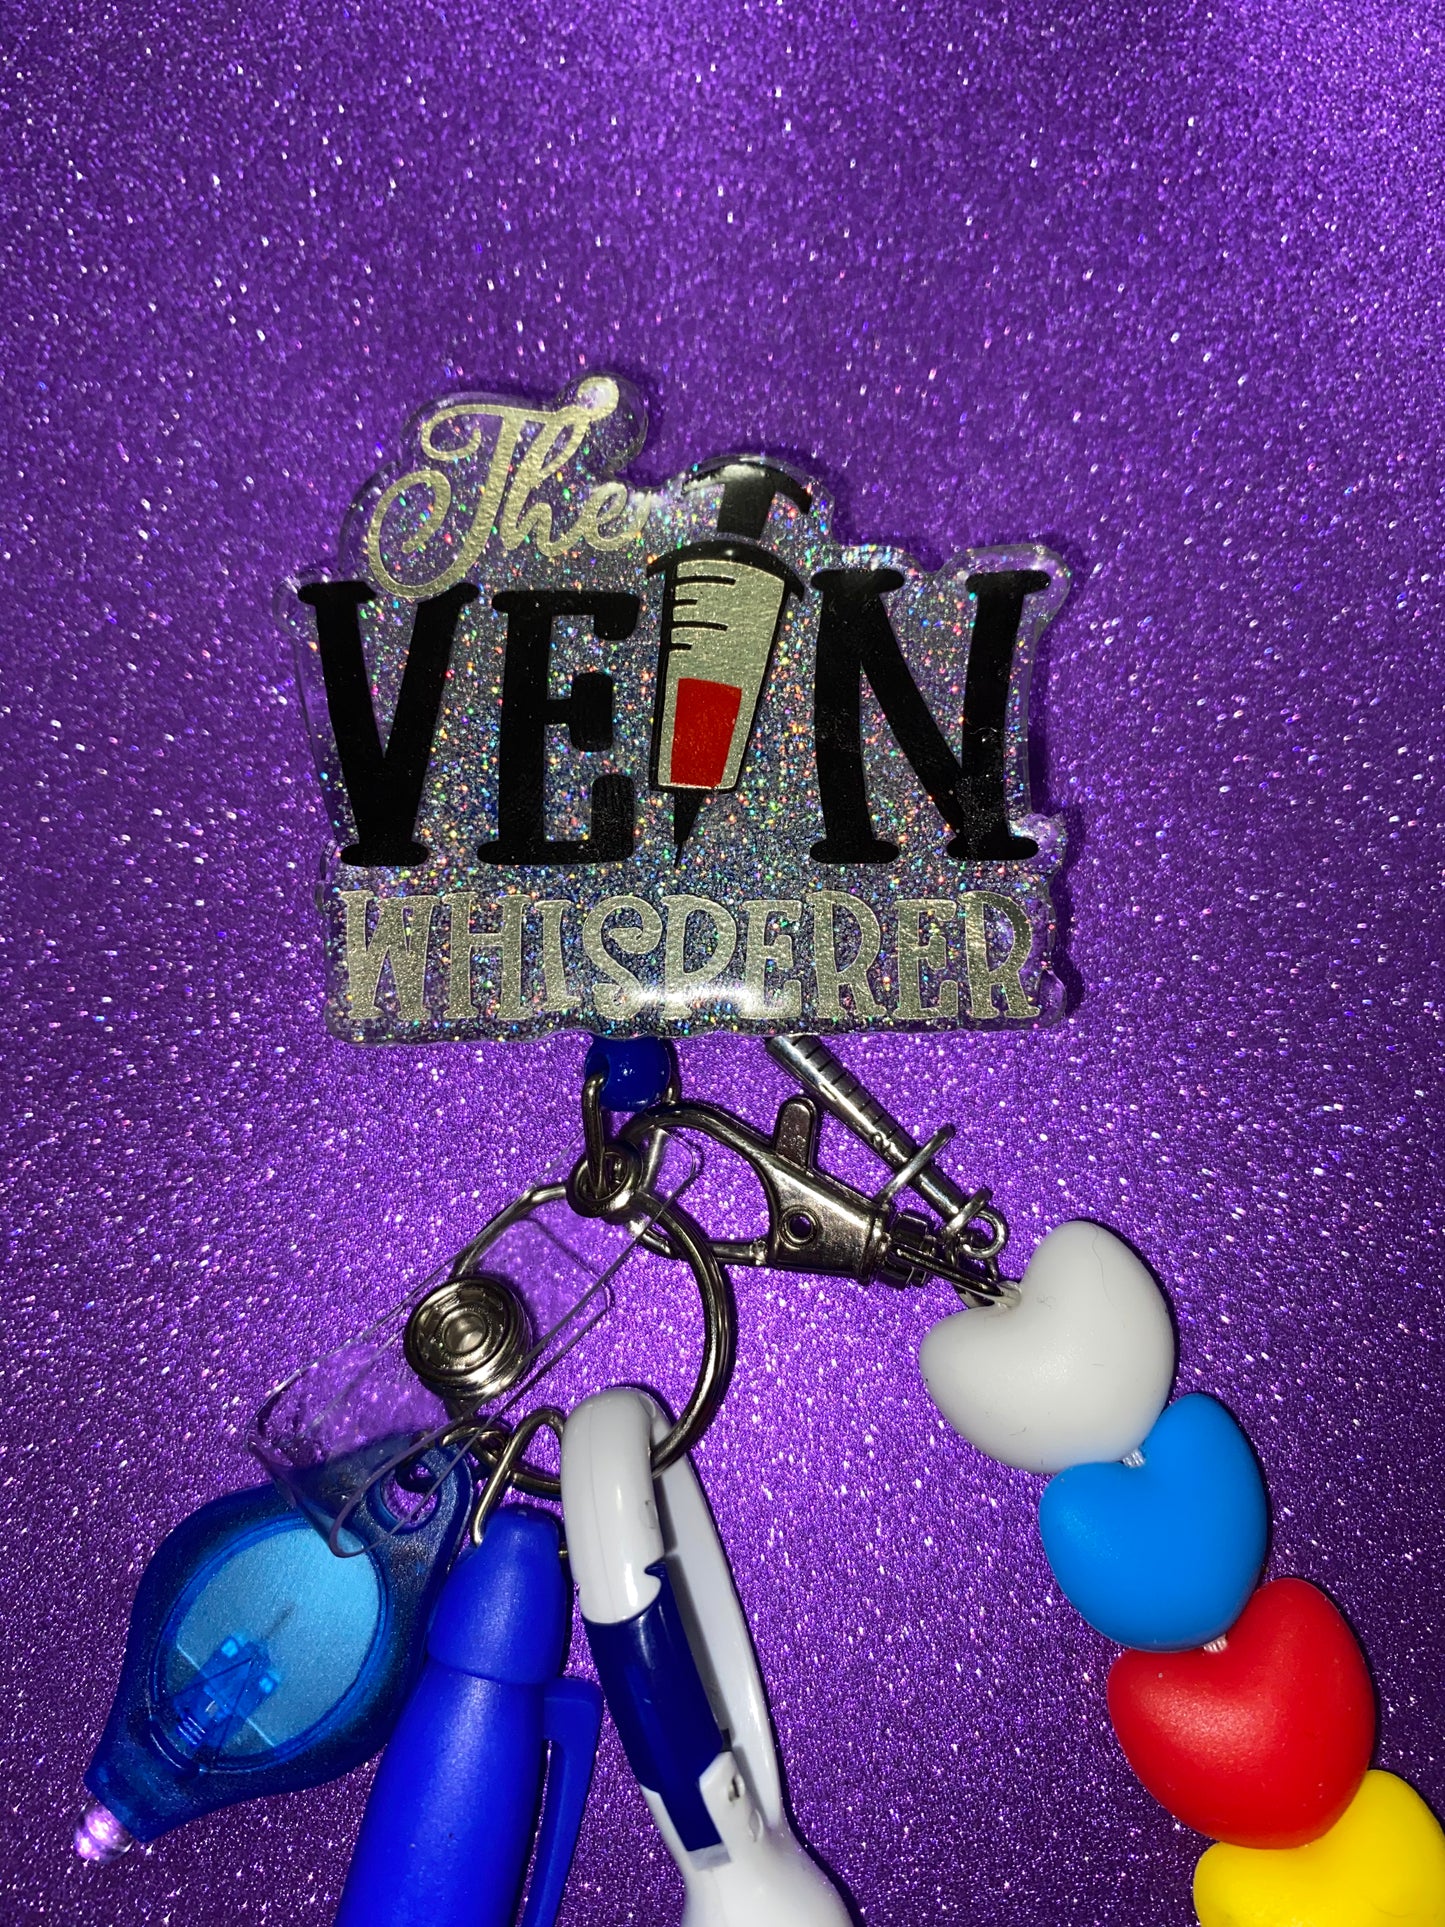 Vein Whisperer Badge Reel/Order of the Draw Badge Buddy Clip with pen, flashlight and marker